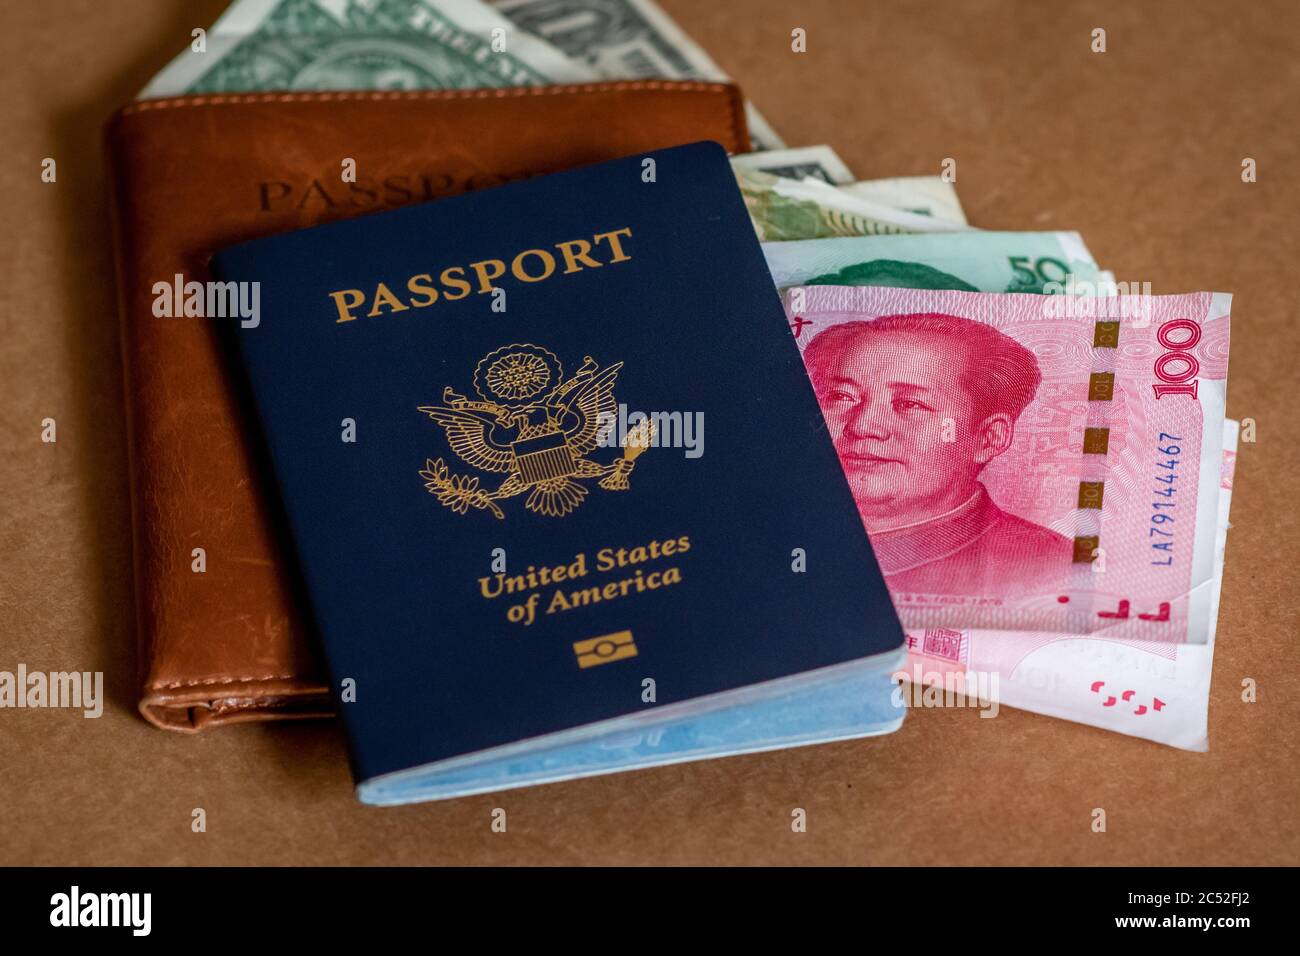 Concept photo of American tourists spending US Dollars and through travel after coronavirus. American passport, leather passport cover, and bank notes. Stock Photo